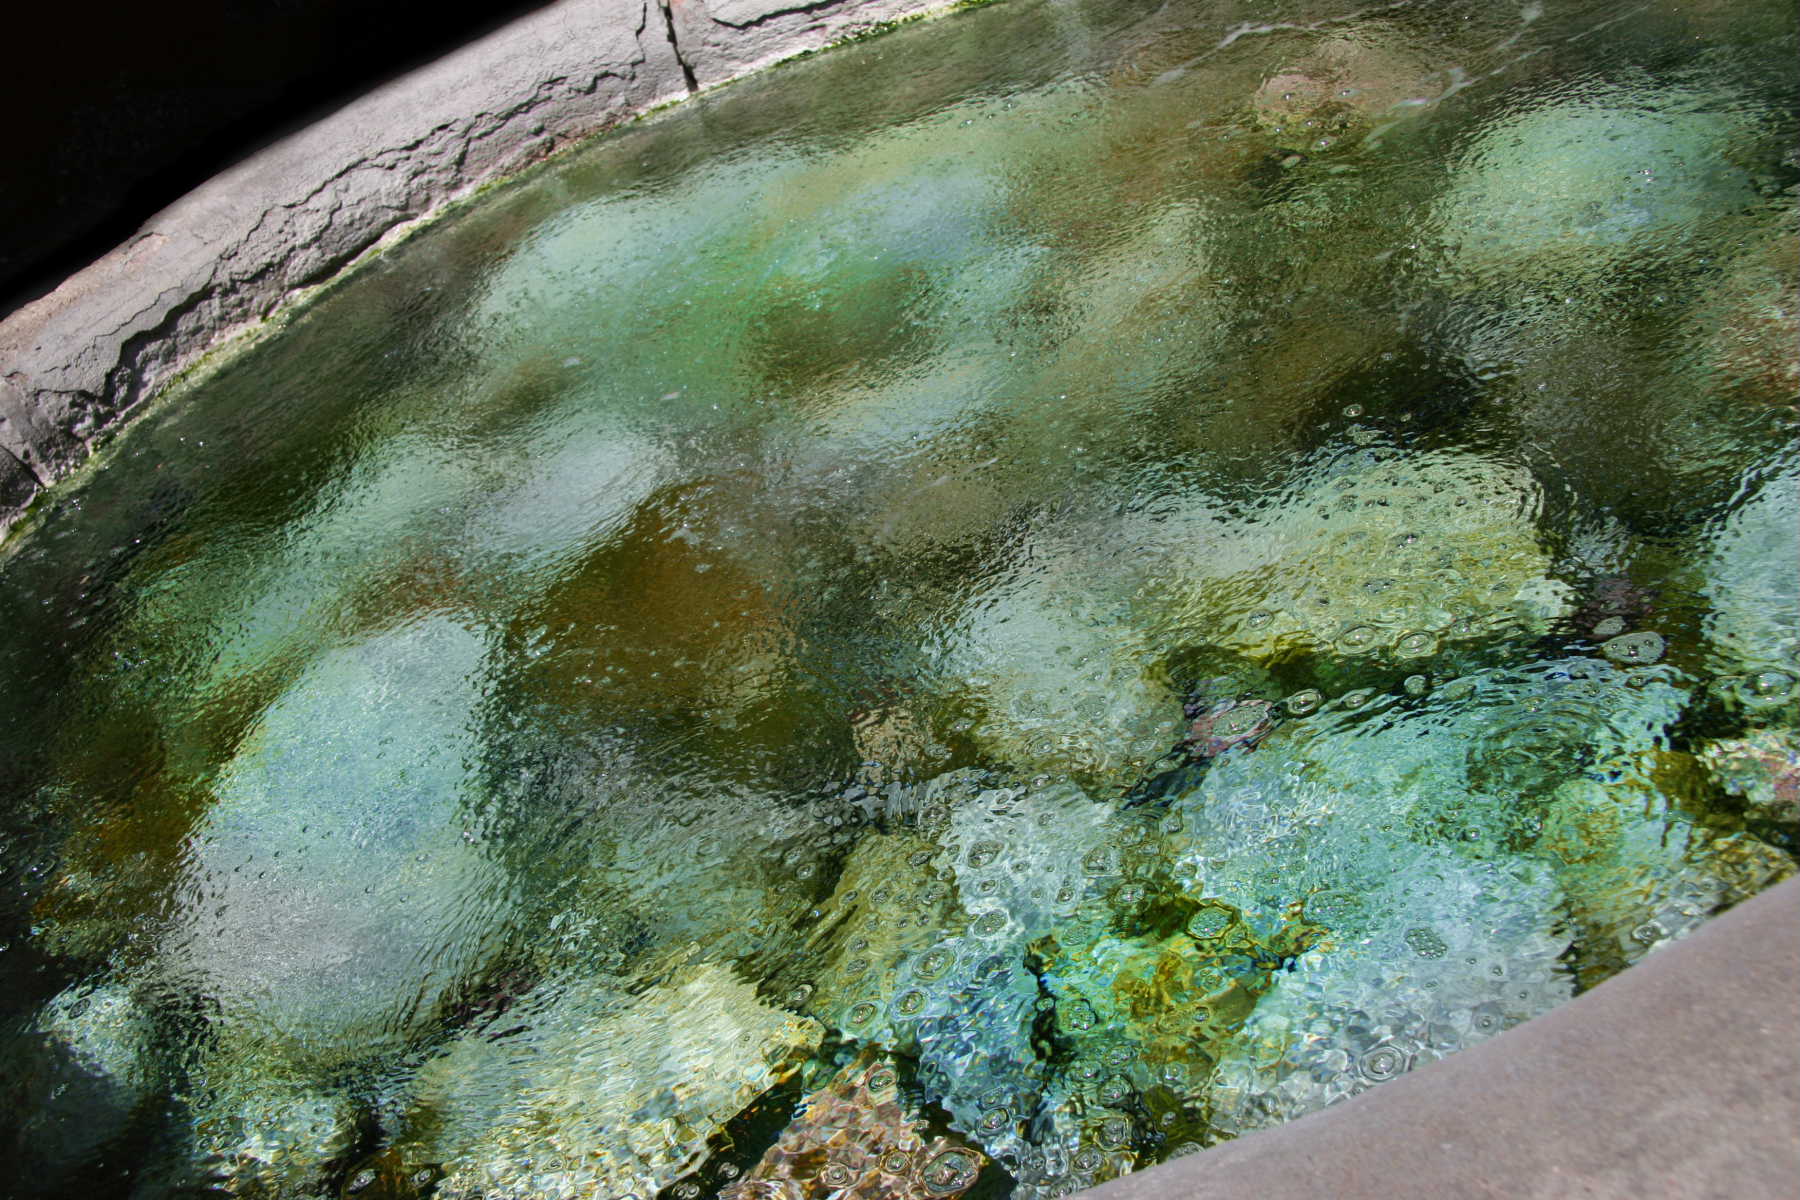 The drinking spring at Glenwood Hot Springs has been a healing tonic for over a century